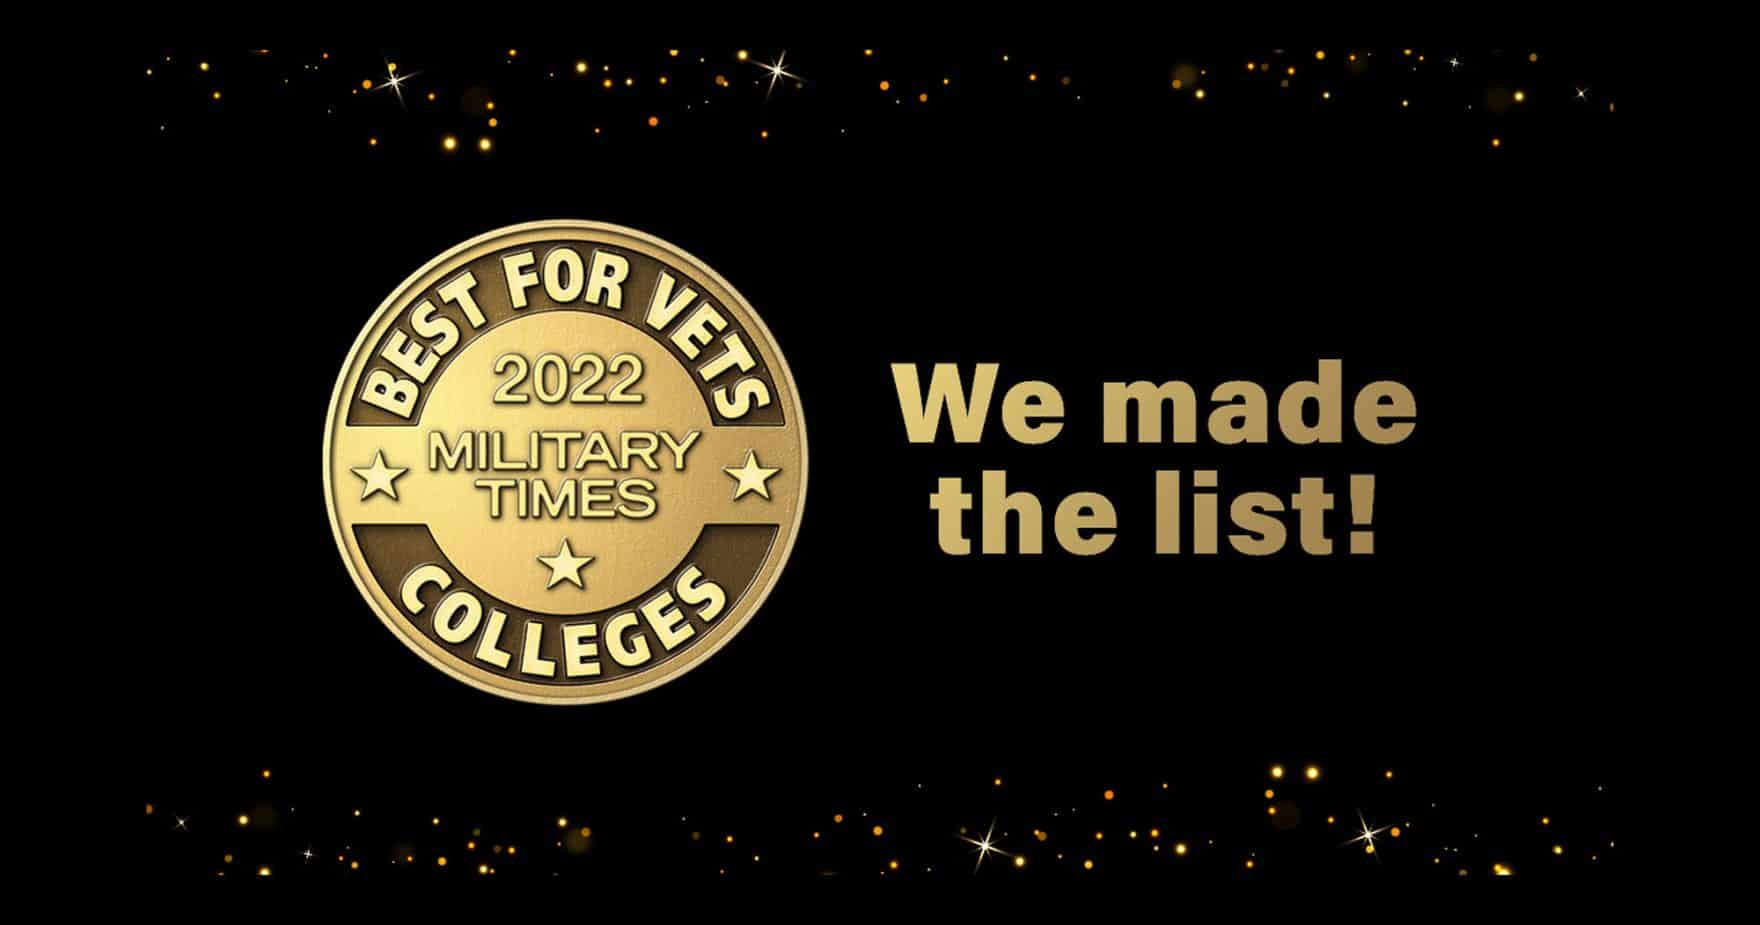 Military Times 2022 Best for vets colleges: Regent University made the list.